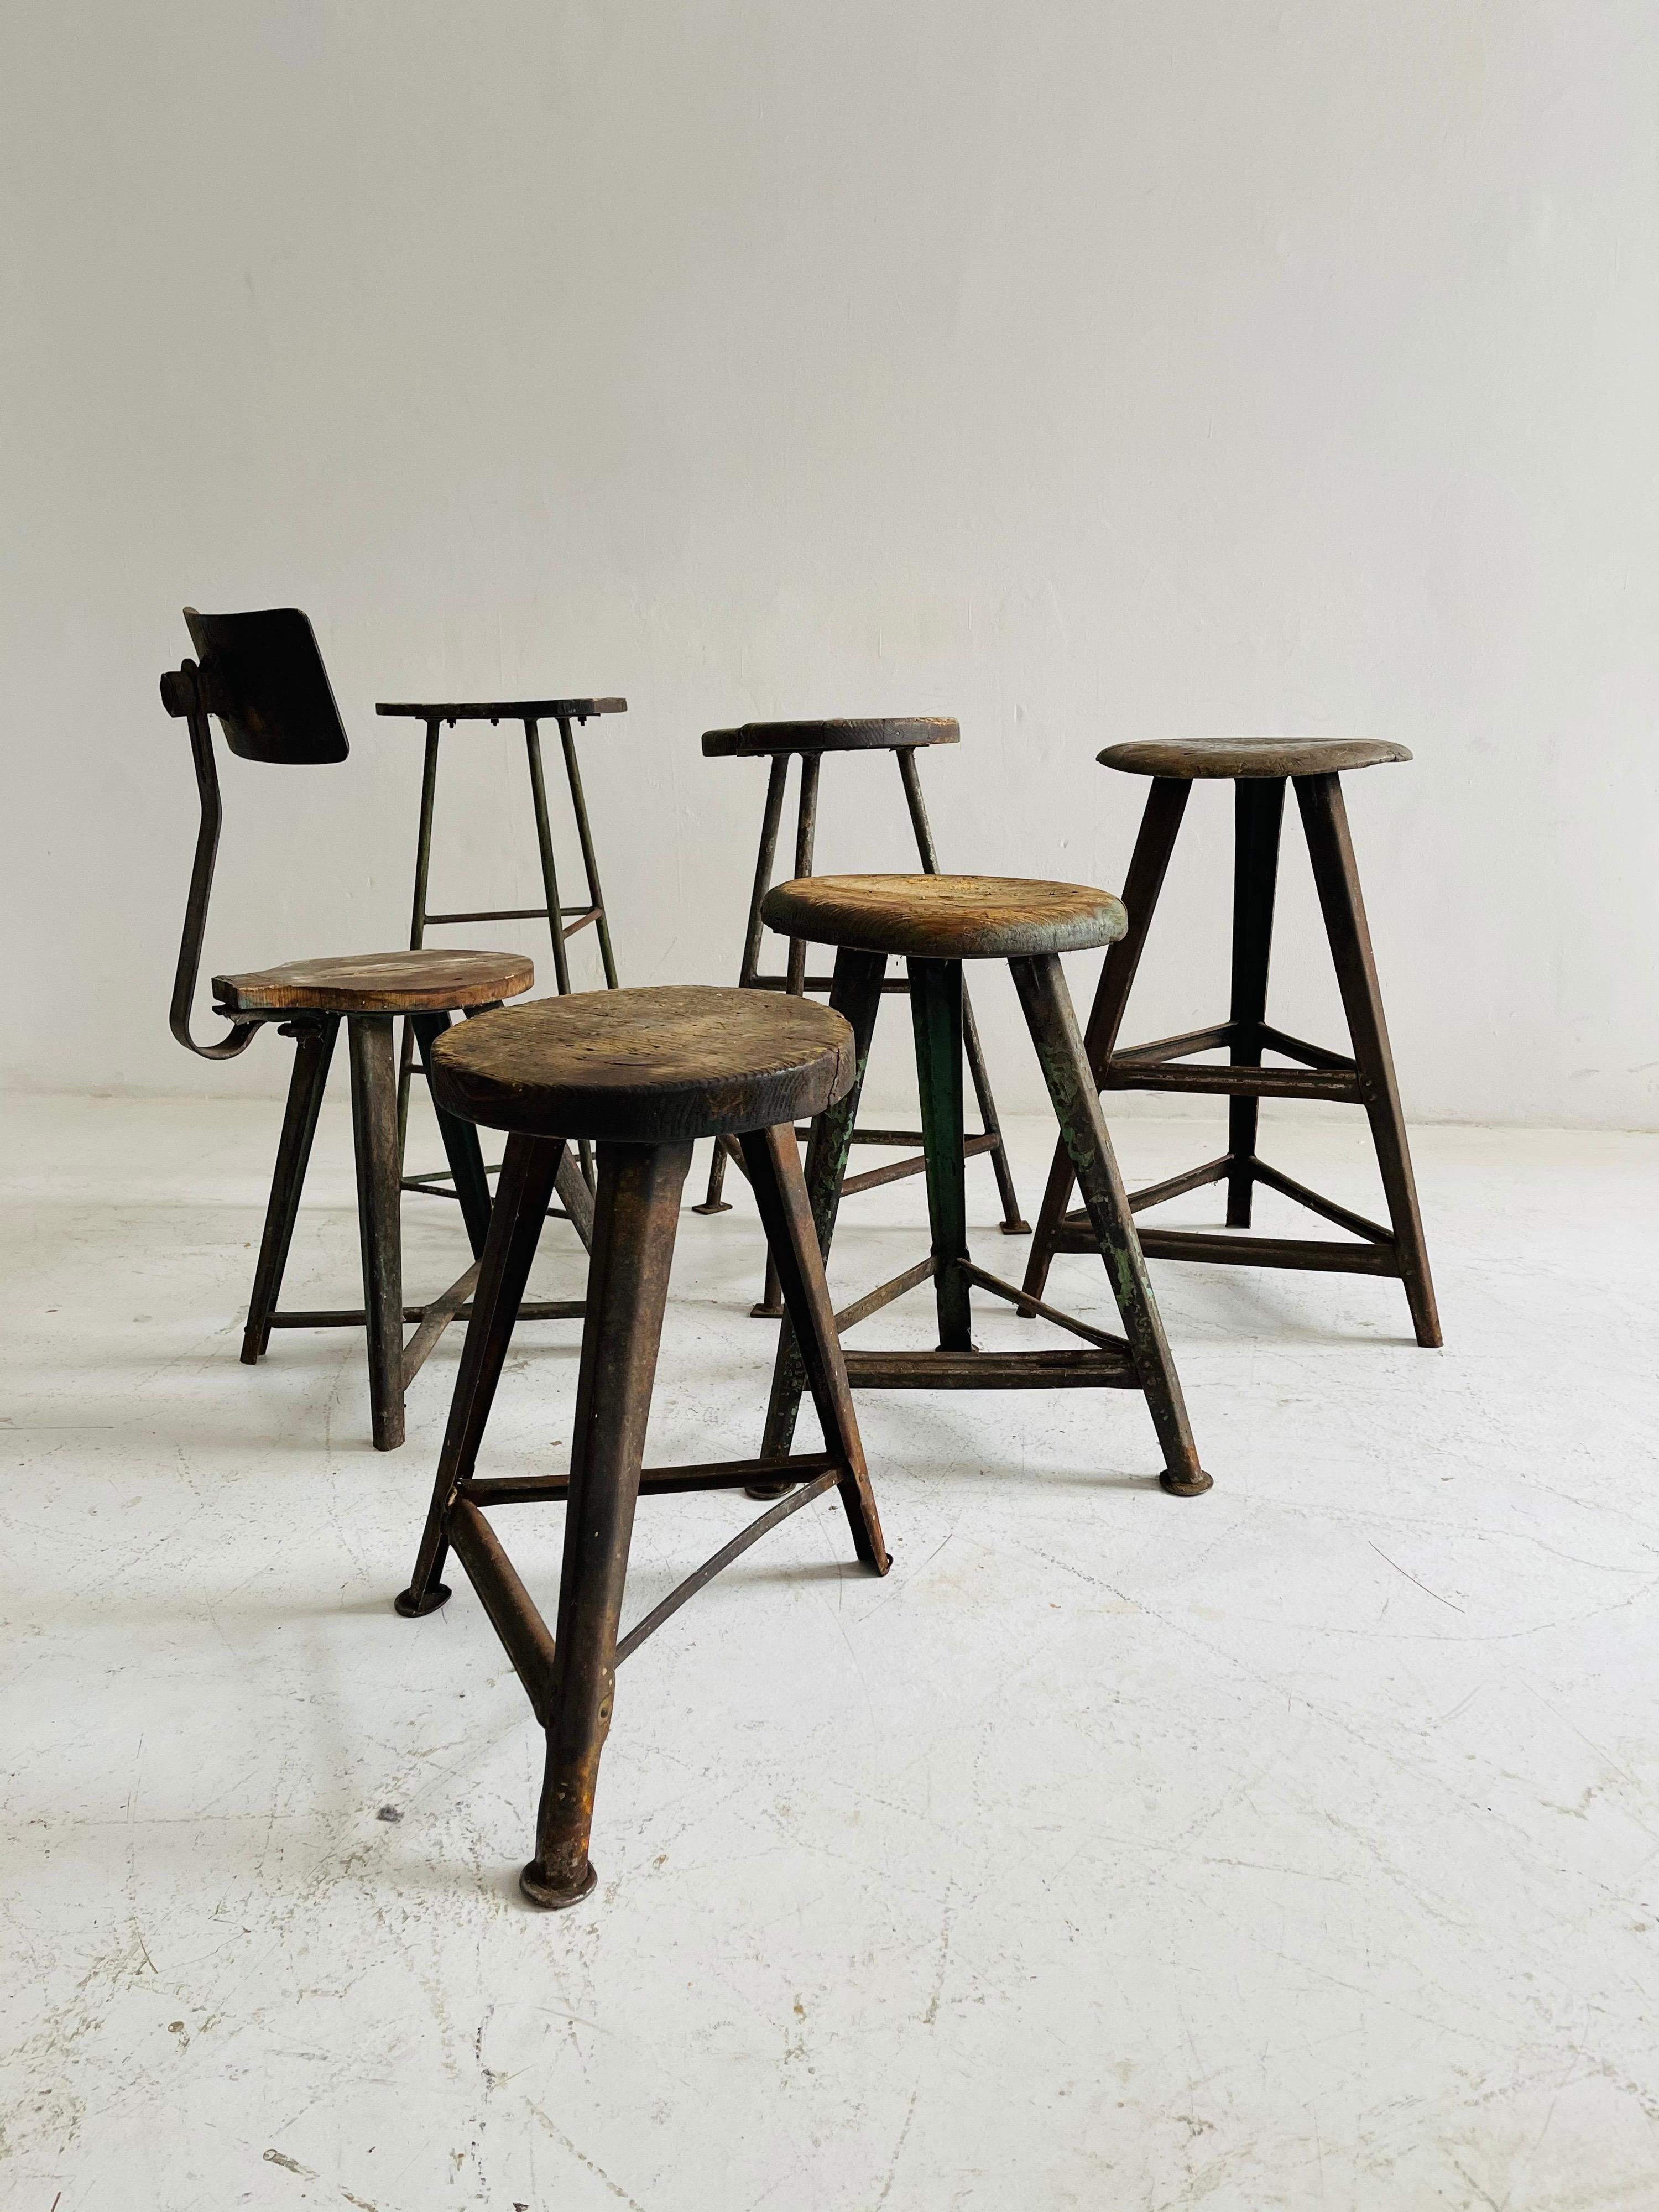 Patinated Industrial Factory stools group of six, Austria, 1930s.